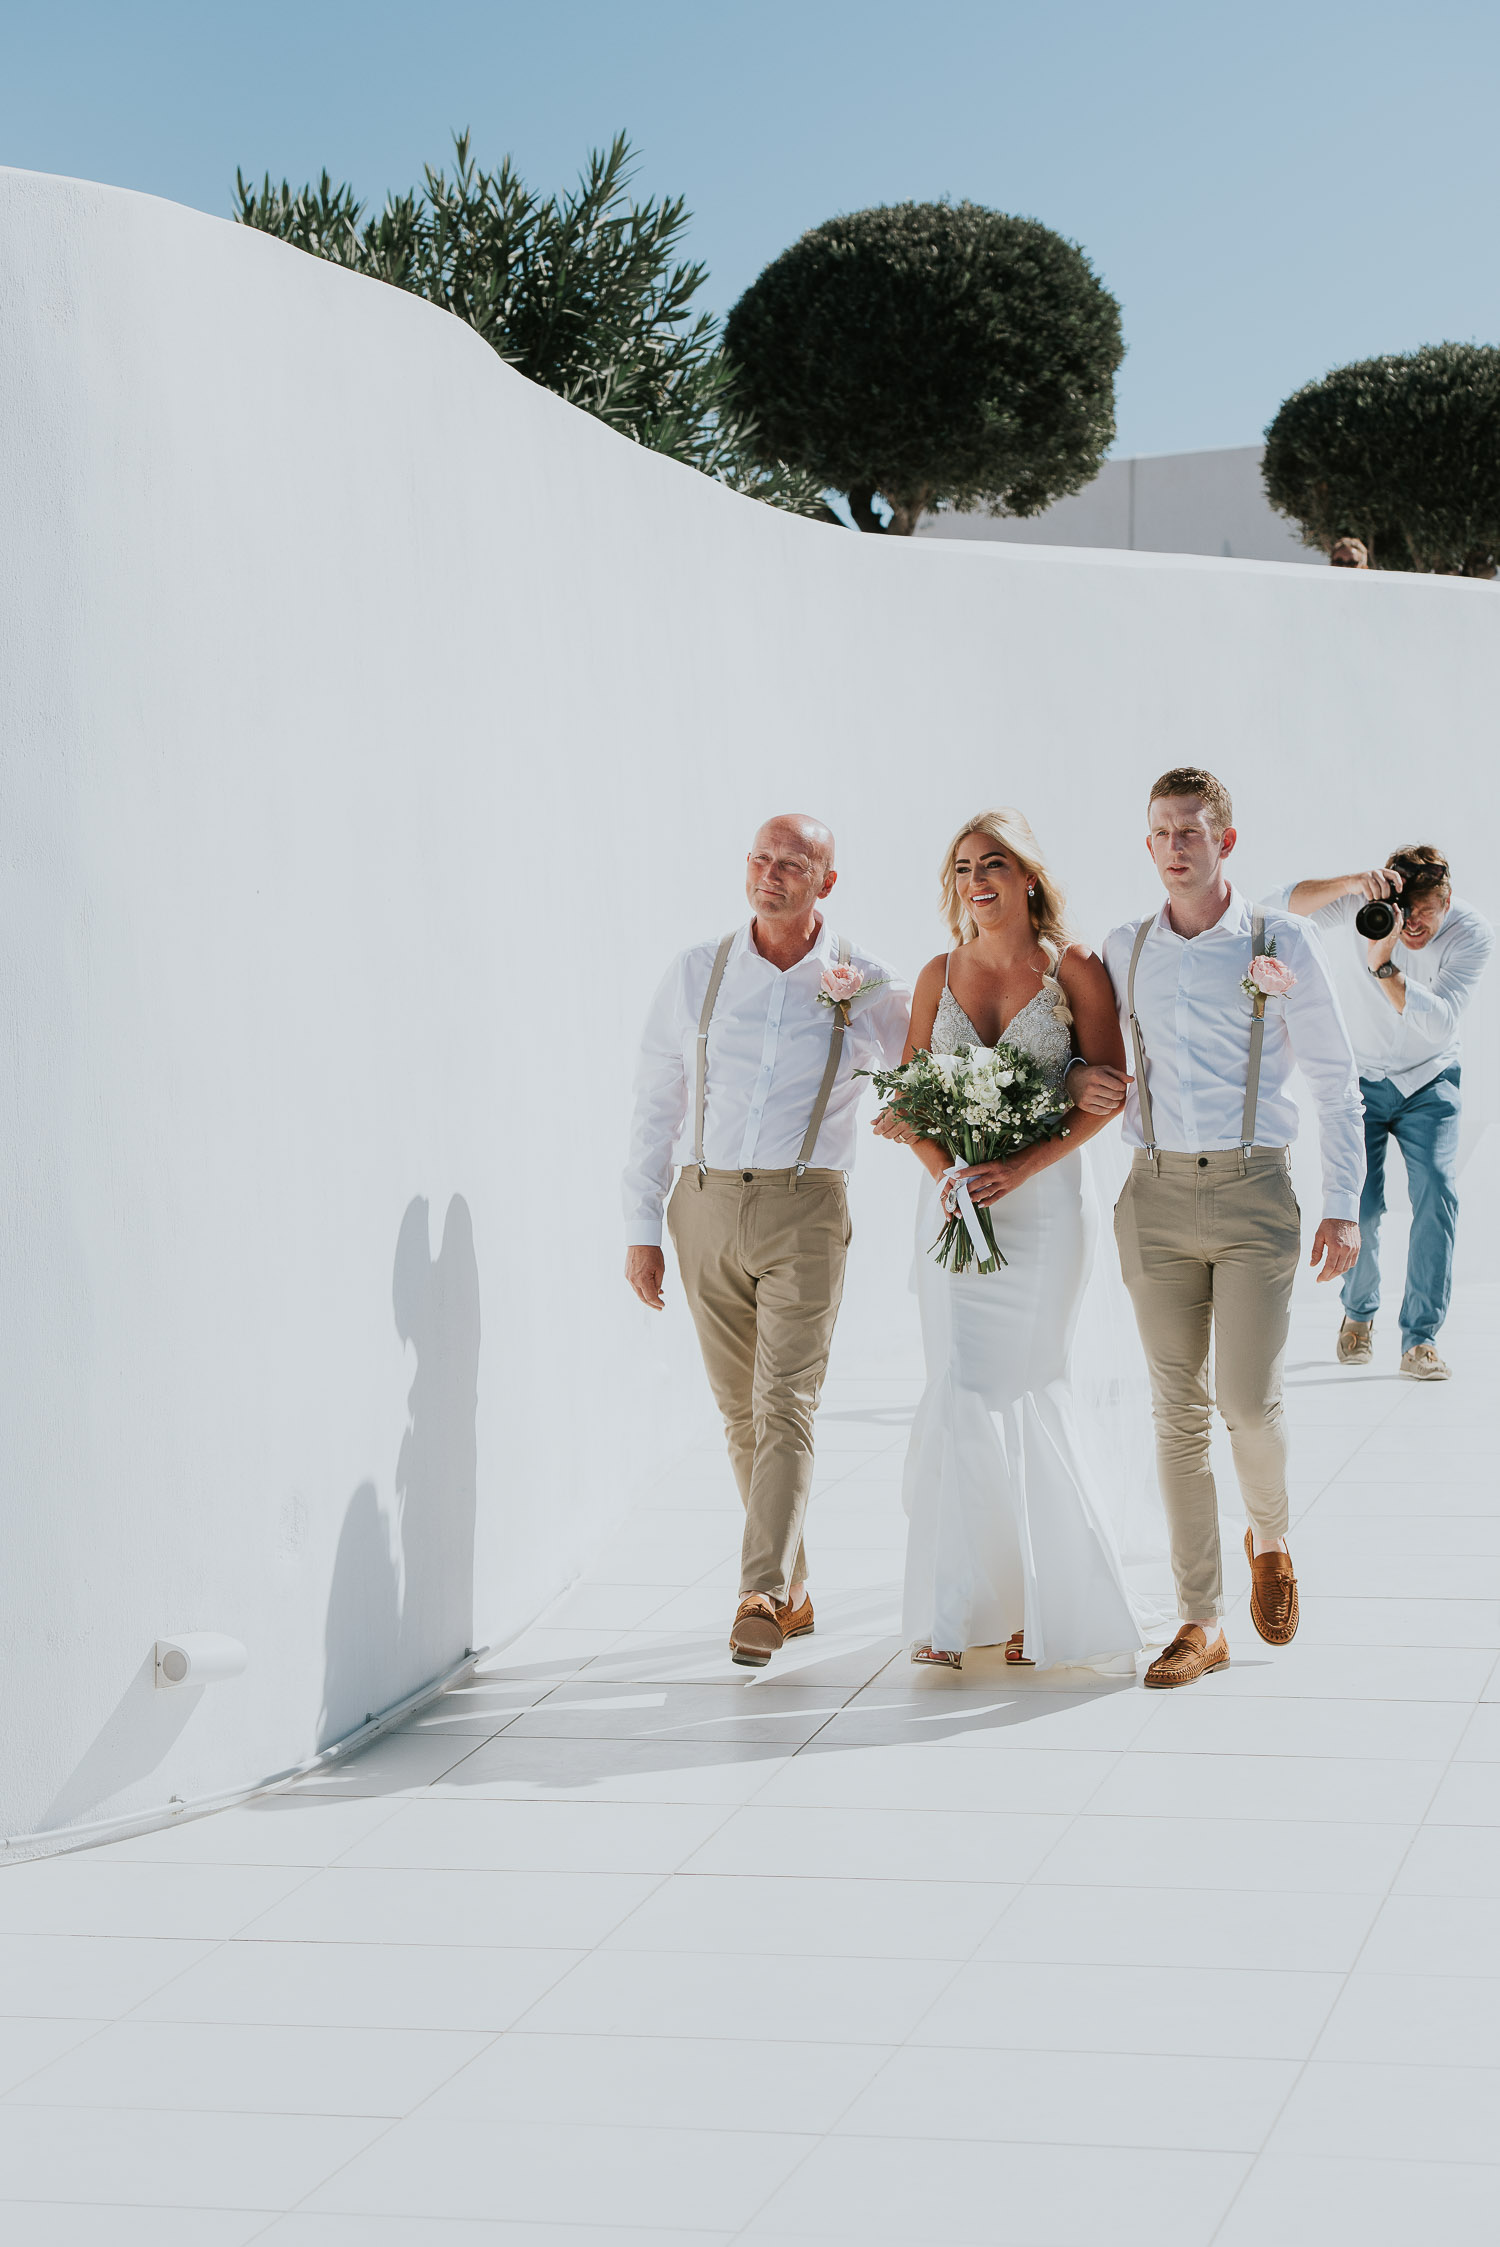 Wedding photographer Santorini: bride smiling walking to the groom with her brother and stepdad by Ben and Vesna.